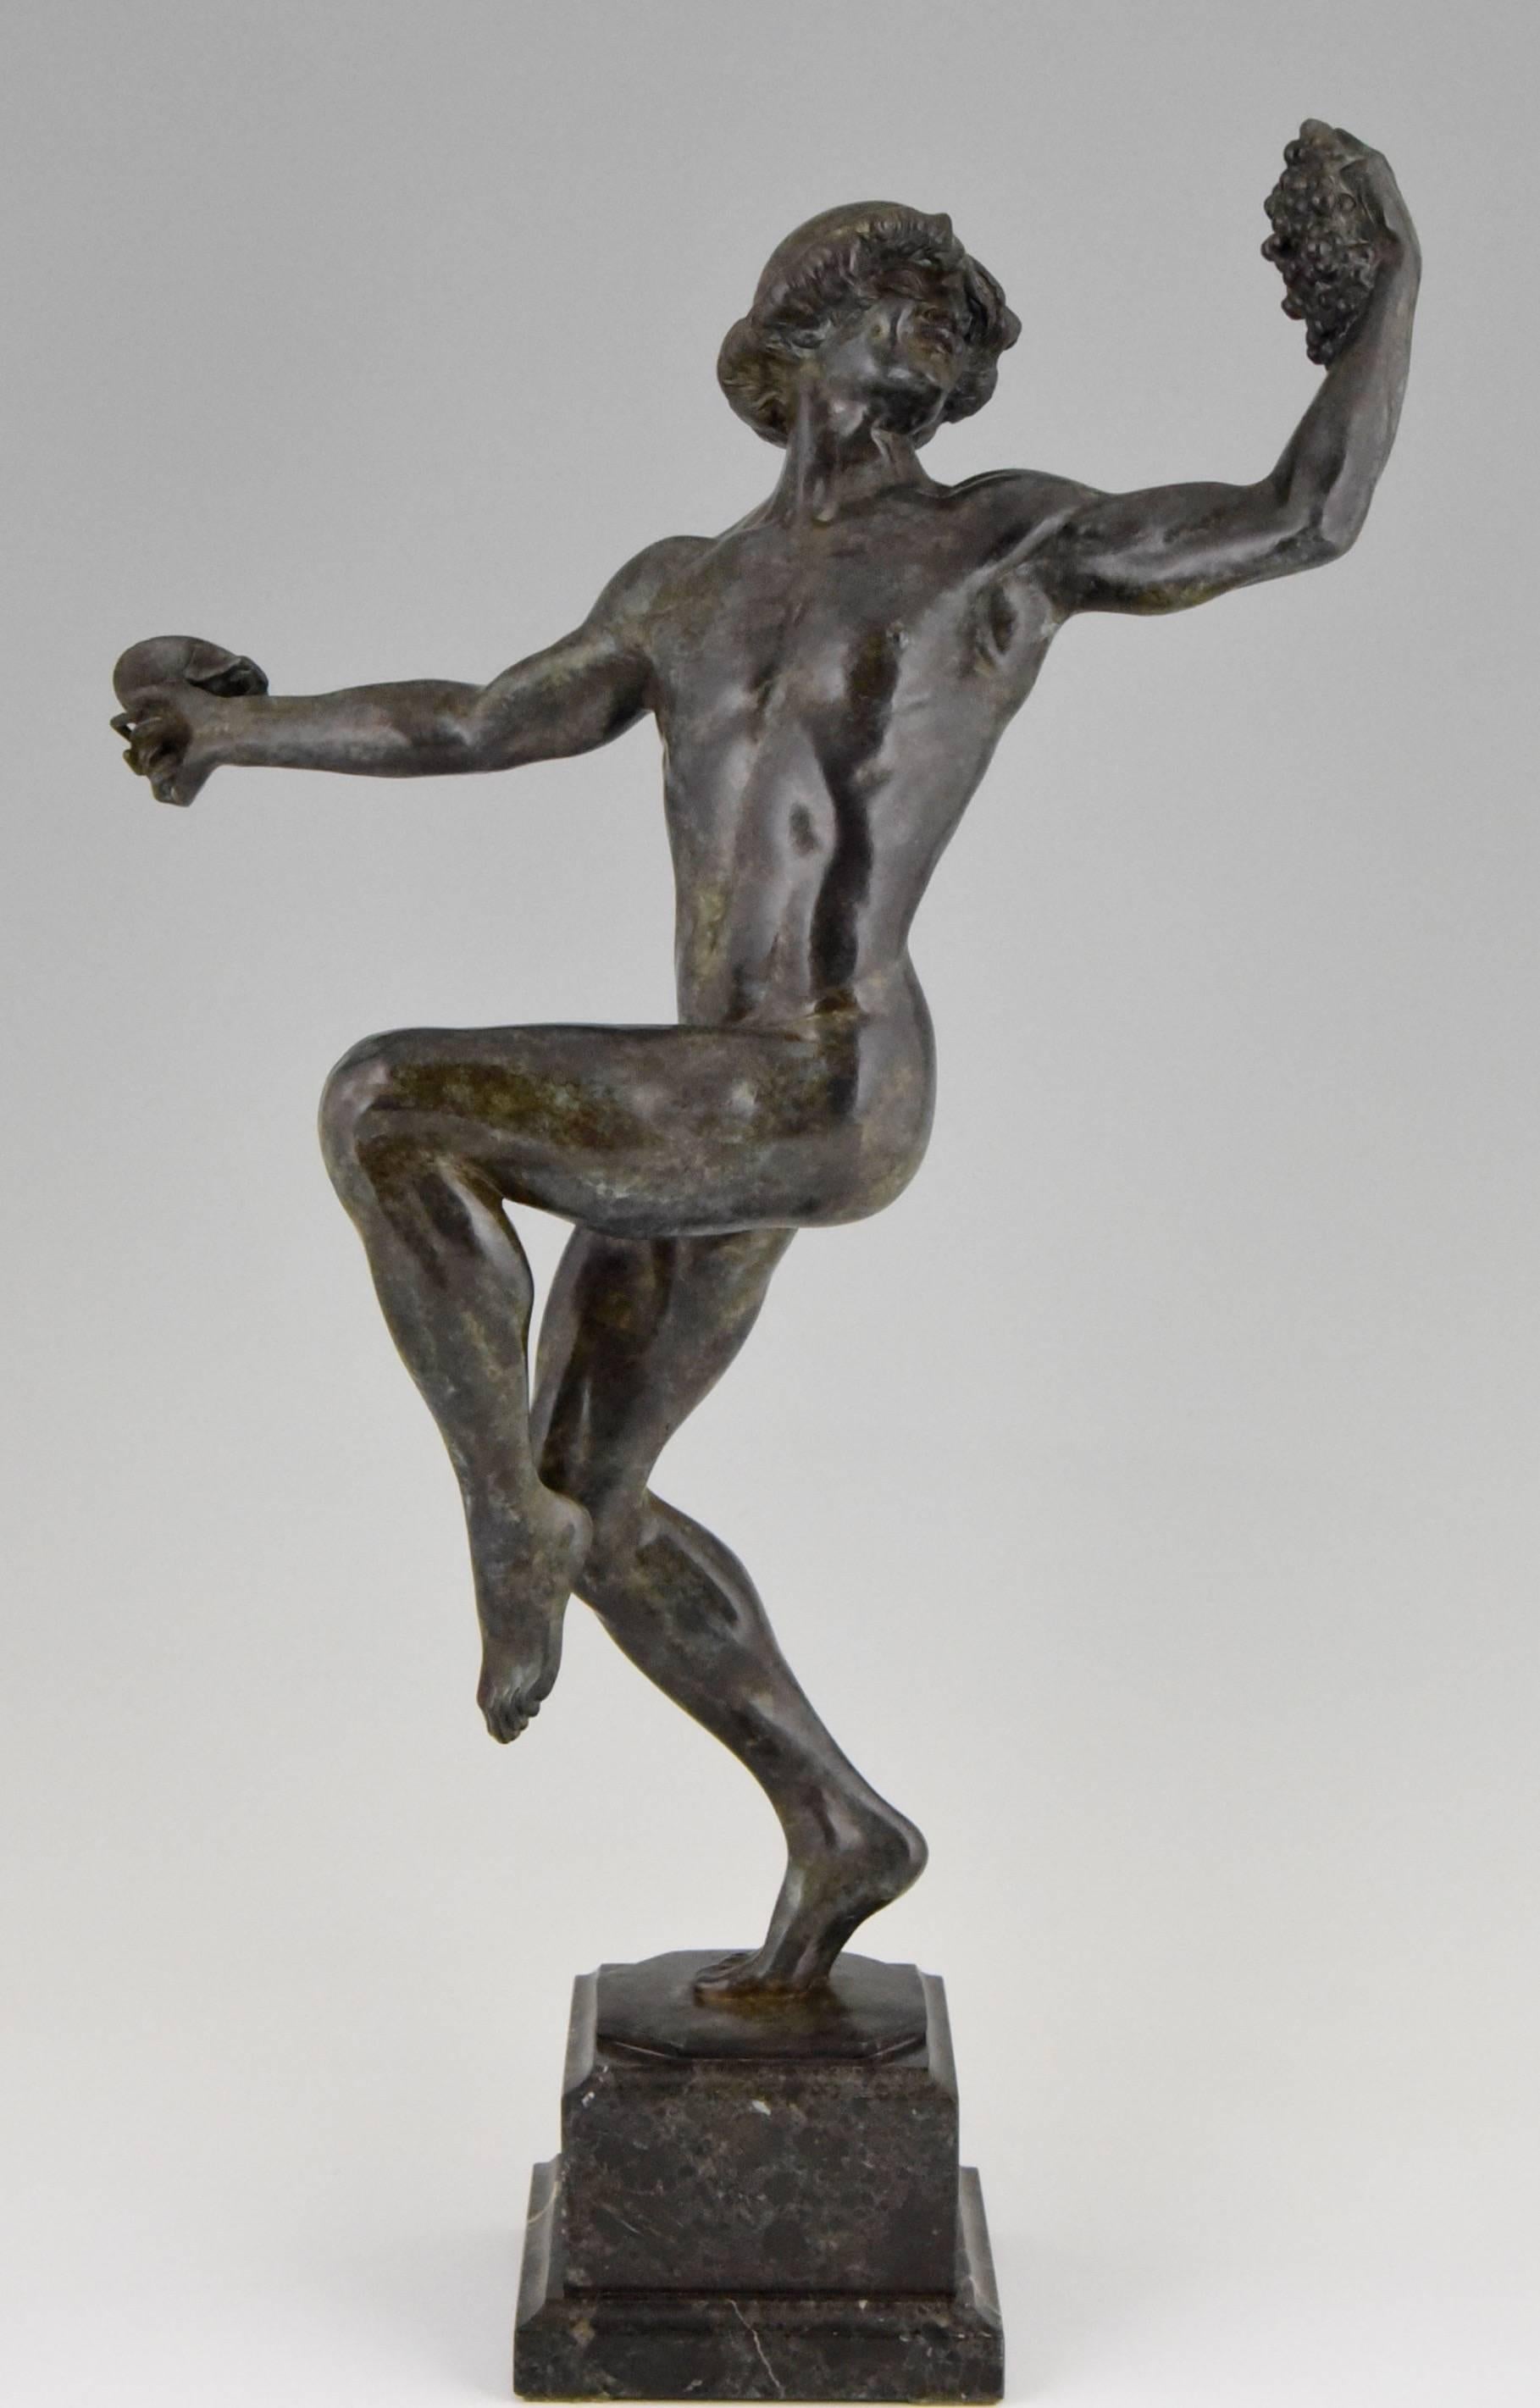 Male nude, dancing bacchant. 
Artist: Rudolf Marcuse, born in Germany in 1878.
Signature/Marks: R. Marcuse.
Date: 1900. 
Material: Bronze, verdigris patina.
Origin: Germany. 
Dimensions: Size:  
H 19.9 inch x L 12.2 inch x W 7.1 inch.
H 50.5